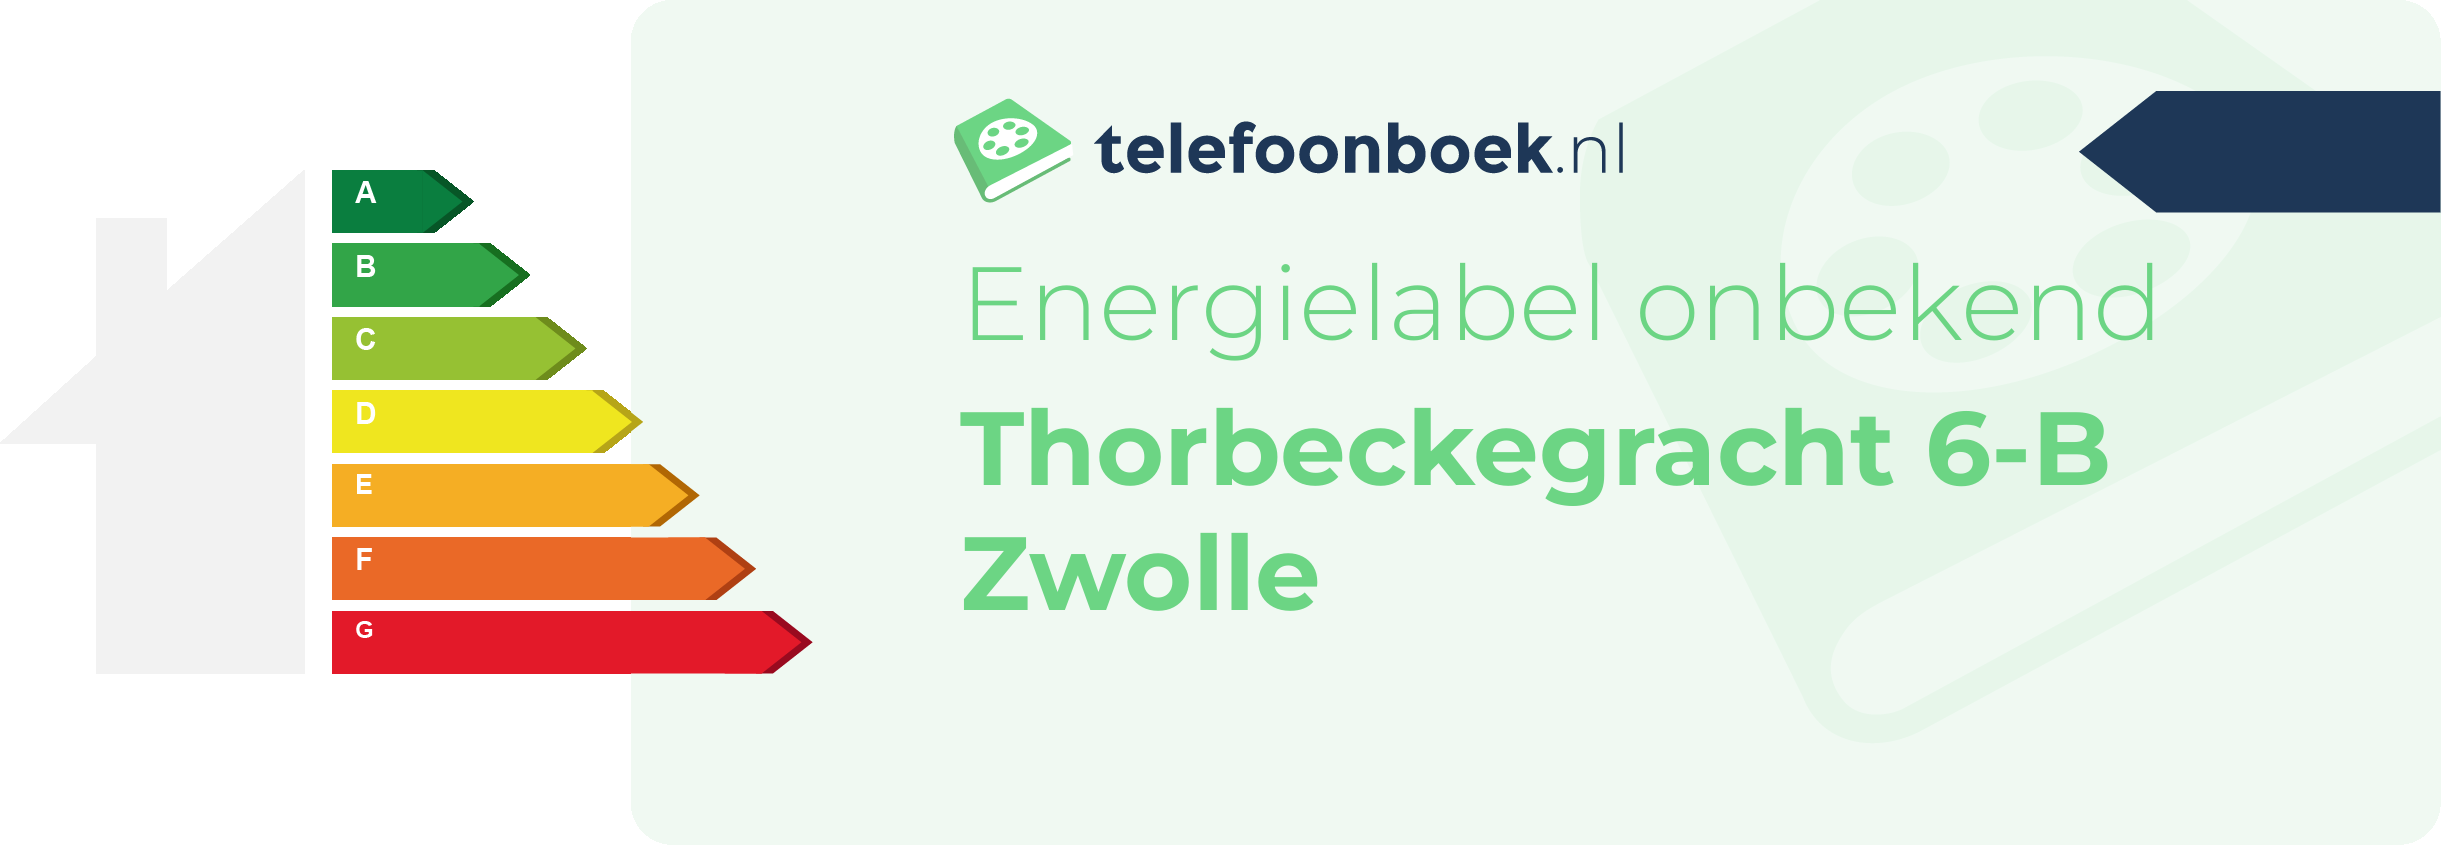 Energielabel Thorbeckegracht 6-B Zwolle